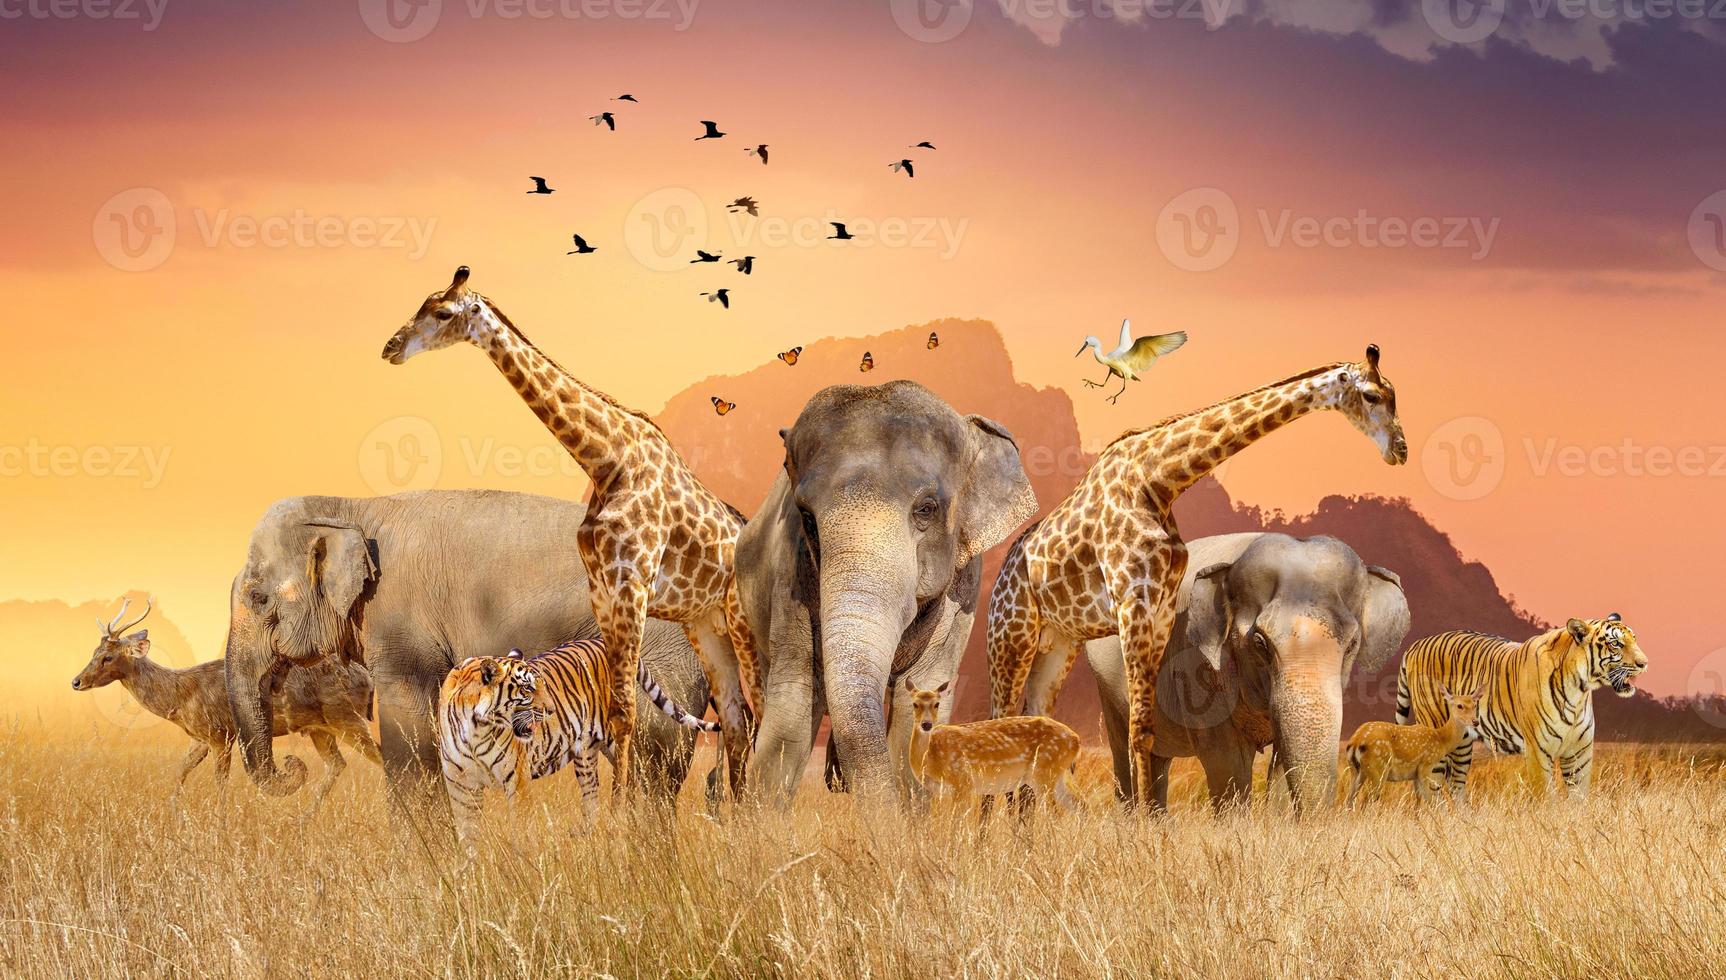 World Wildlife Day  Groups of wild beasts were gathered in large herds in the open field in the evening when the golden sun was shining. photo